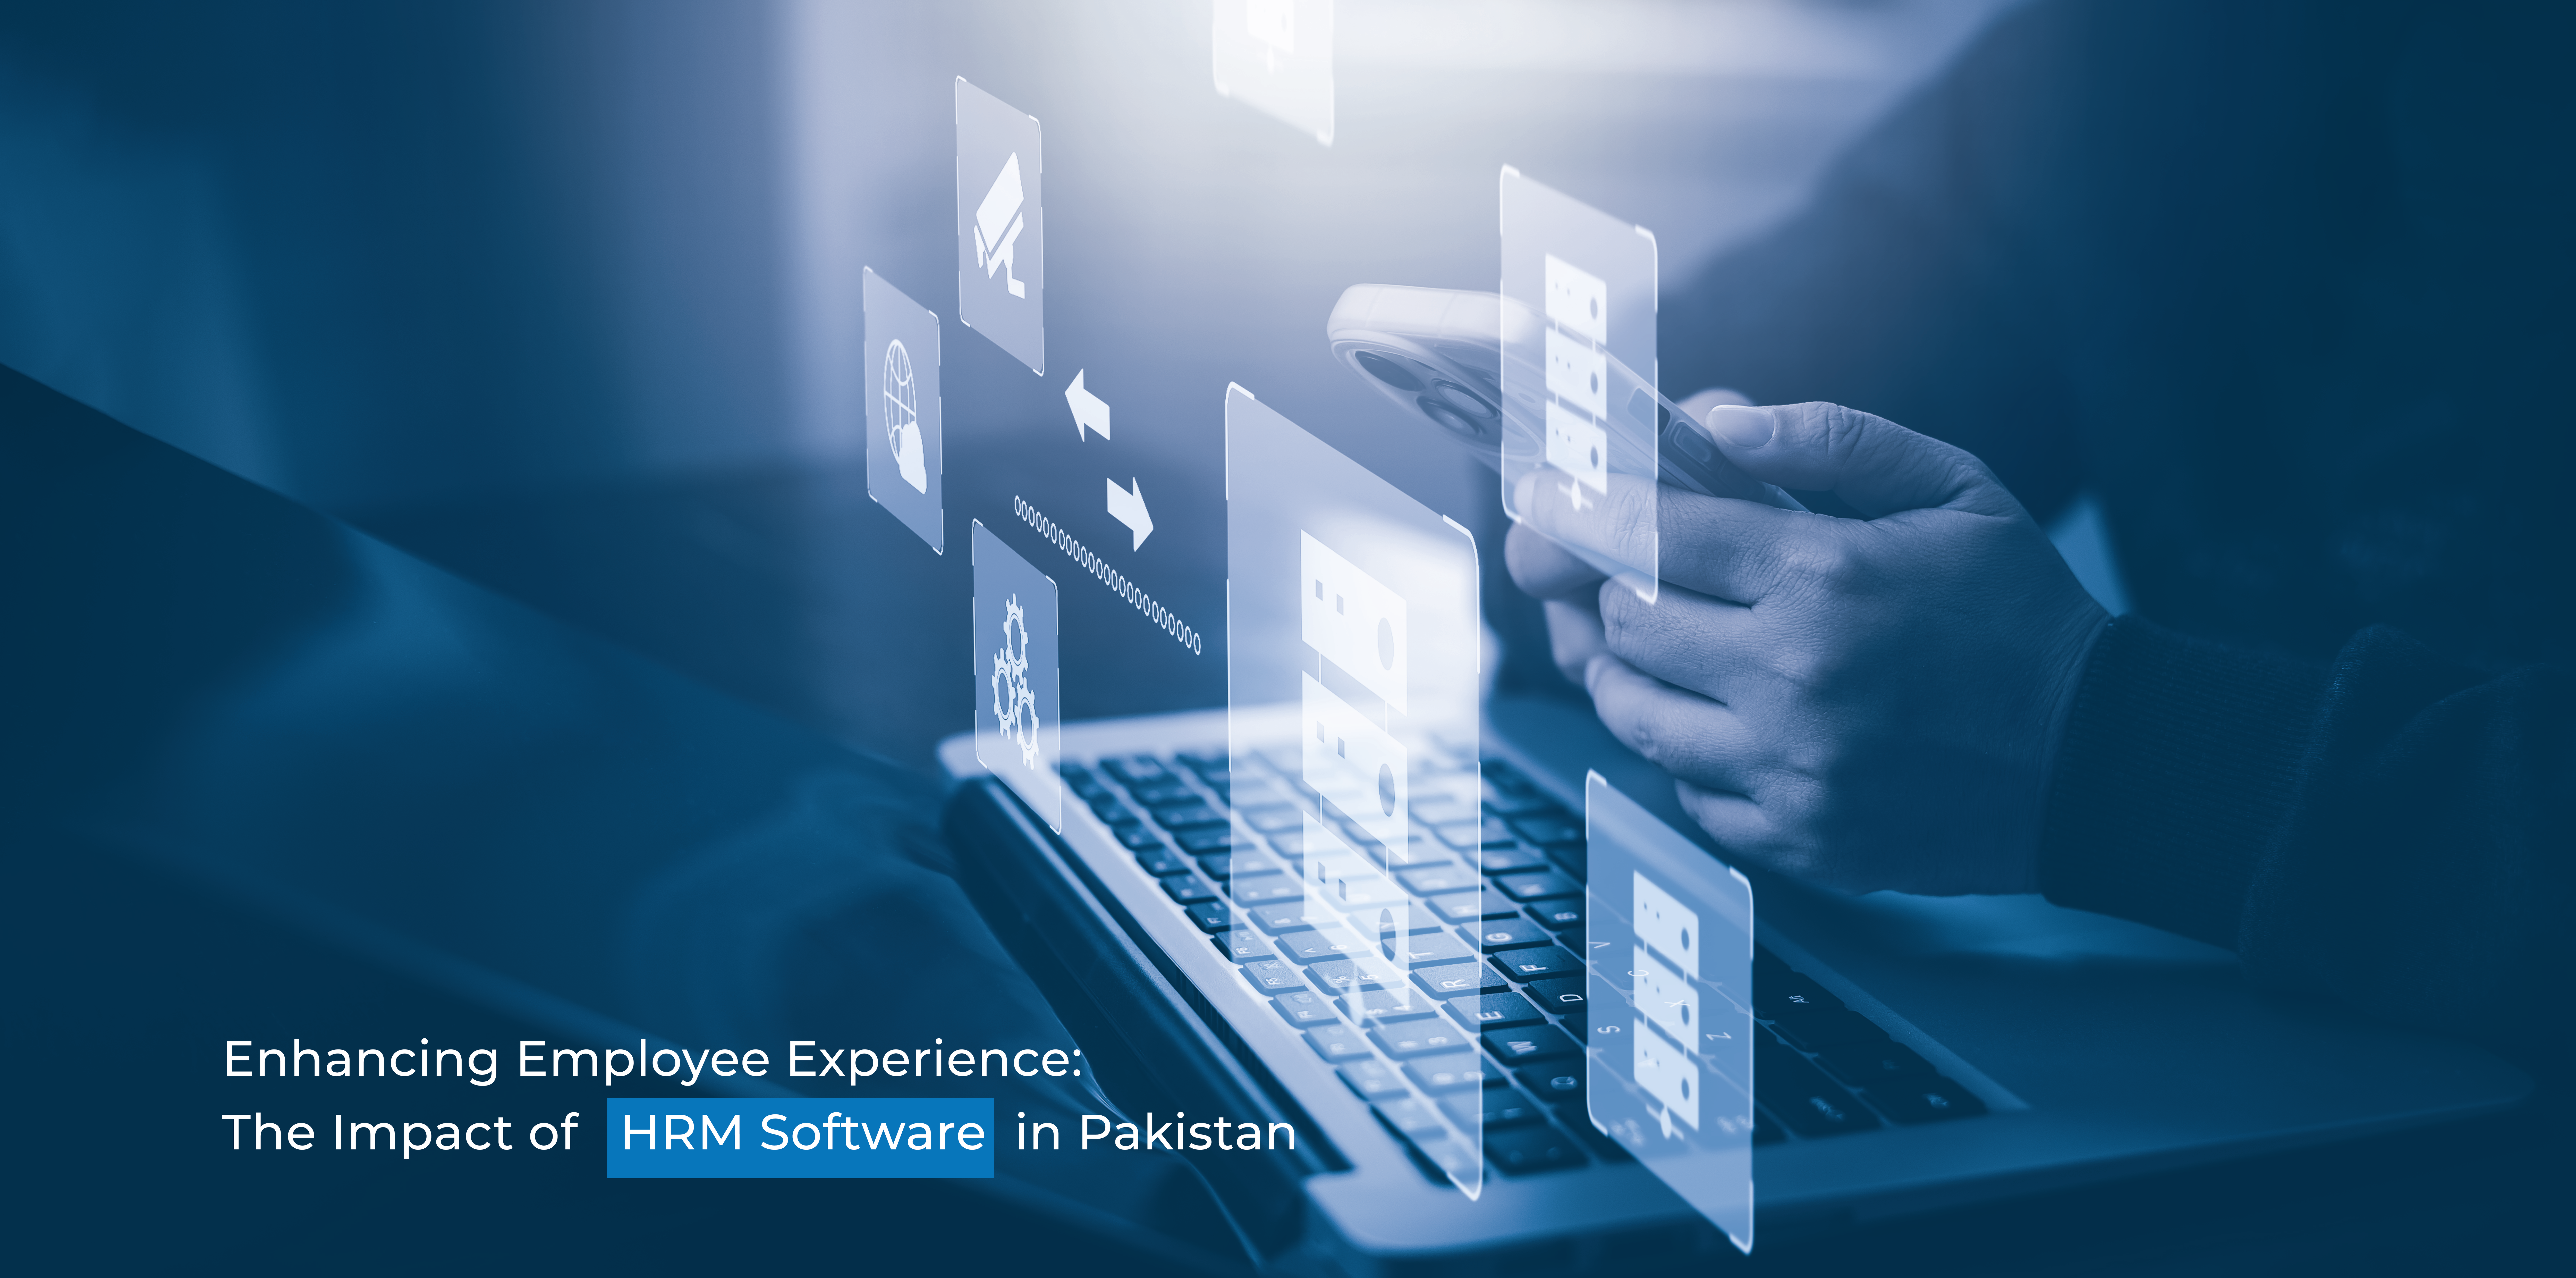 Enhancing Employee Experience: The Impact of HRM Software in Pakistan